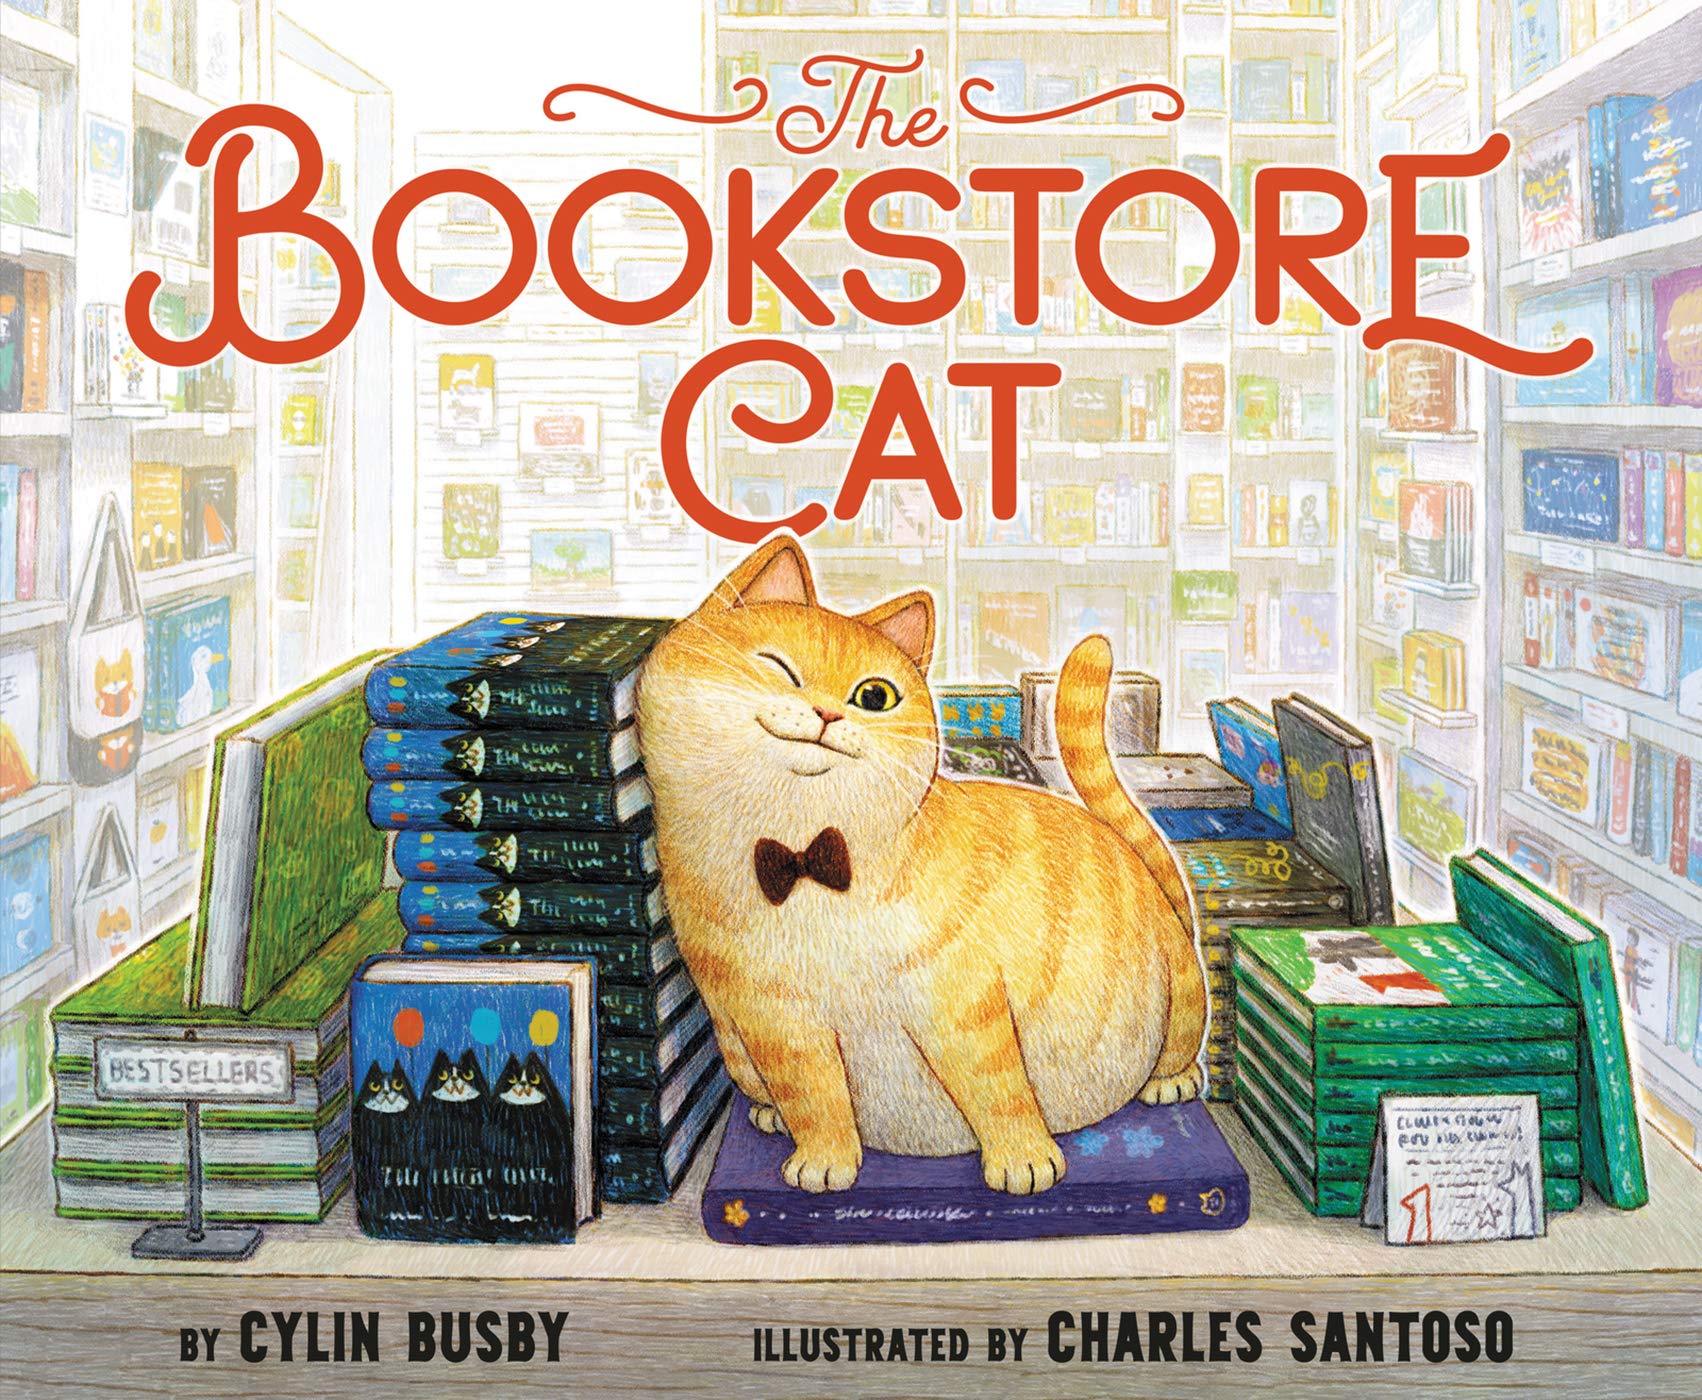 The Bookstore Cat by Colin Busby